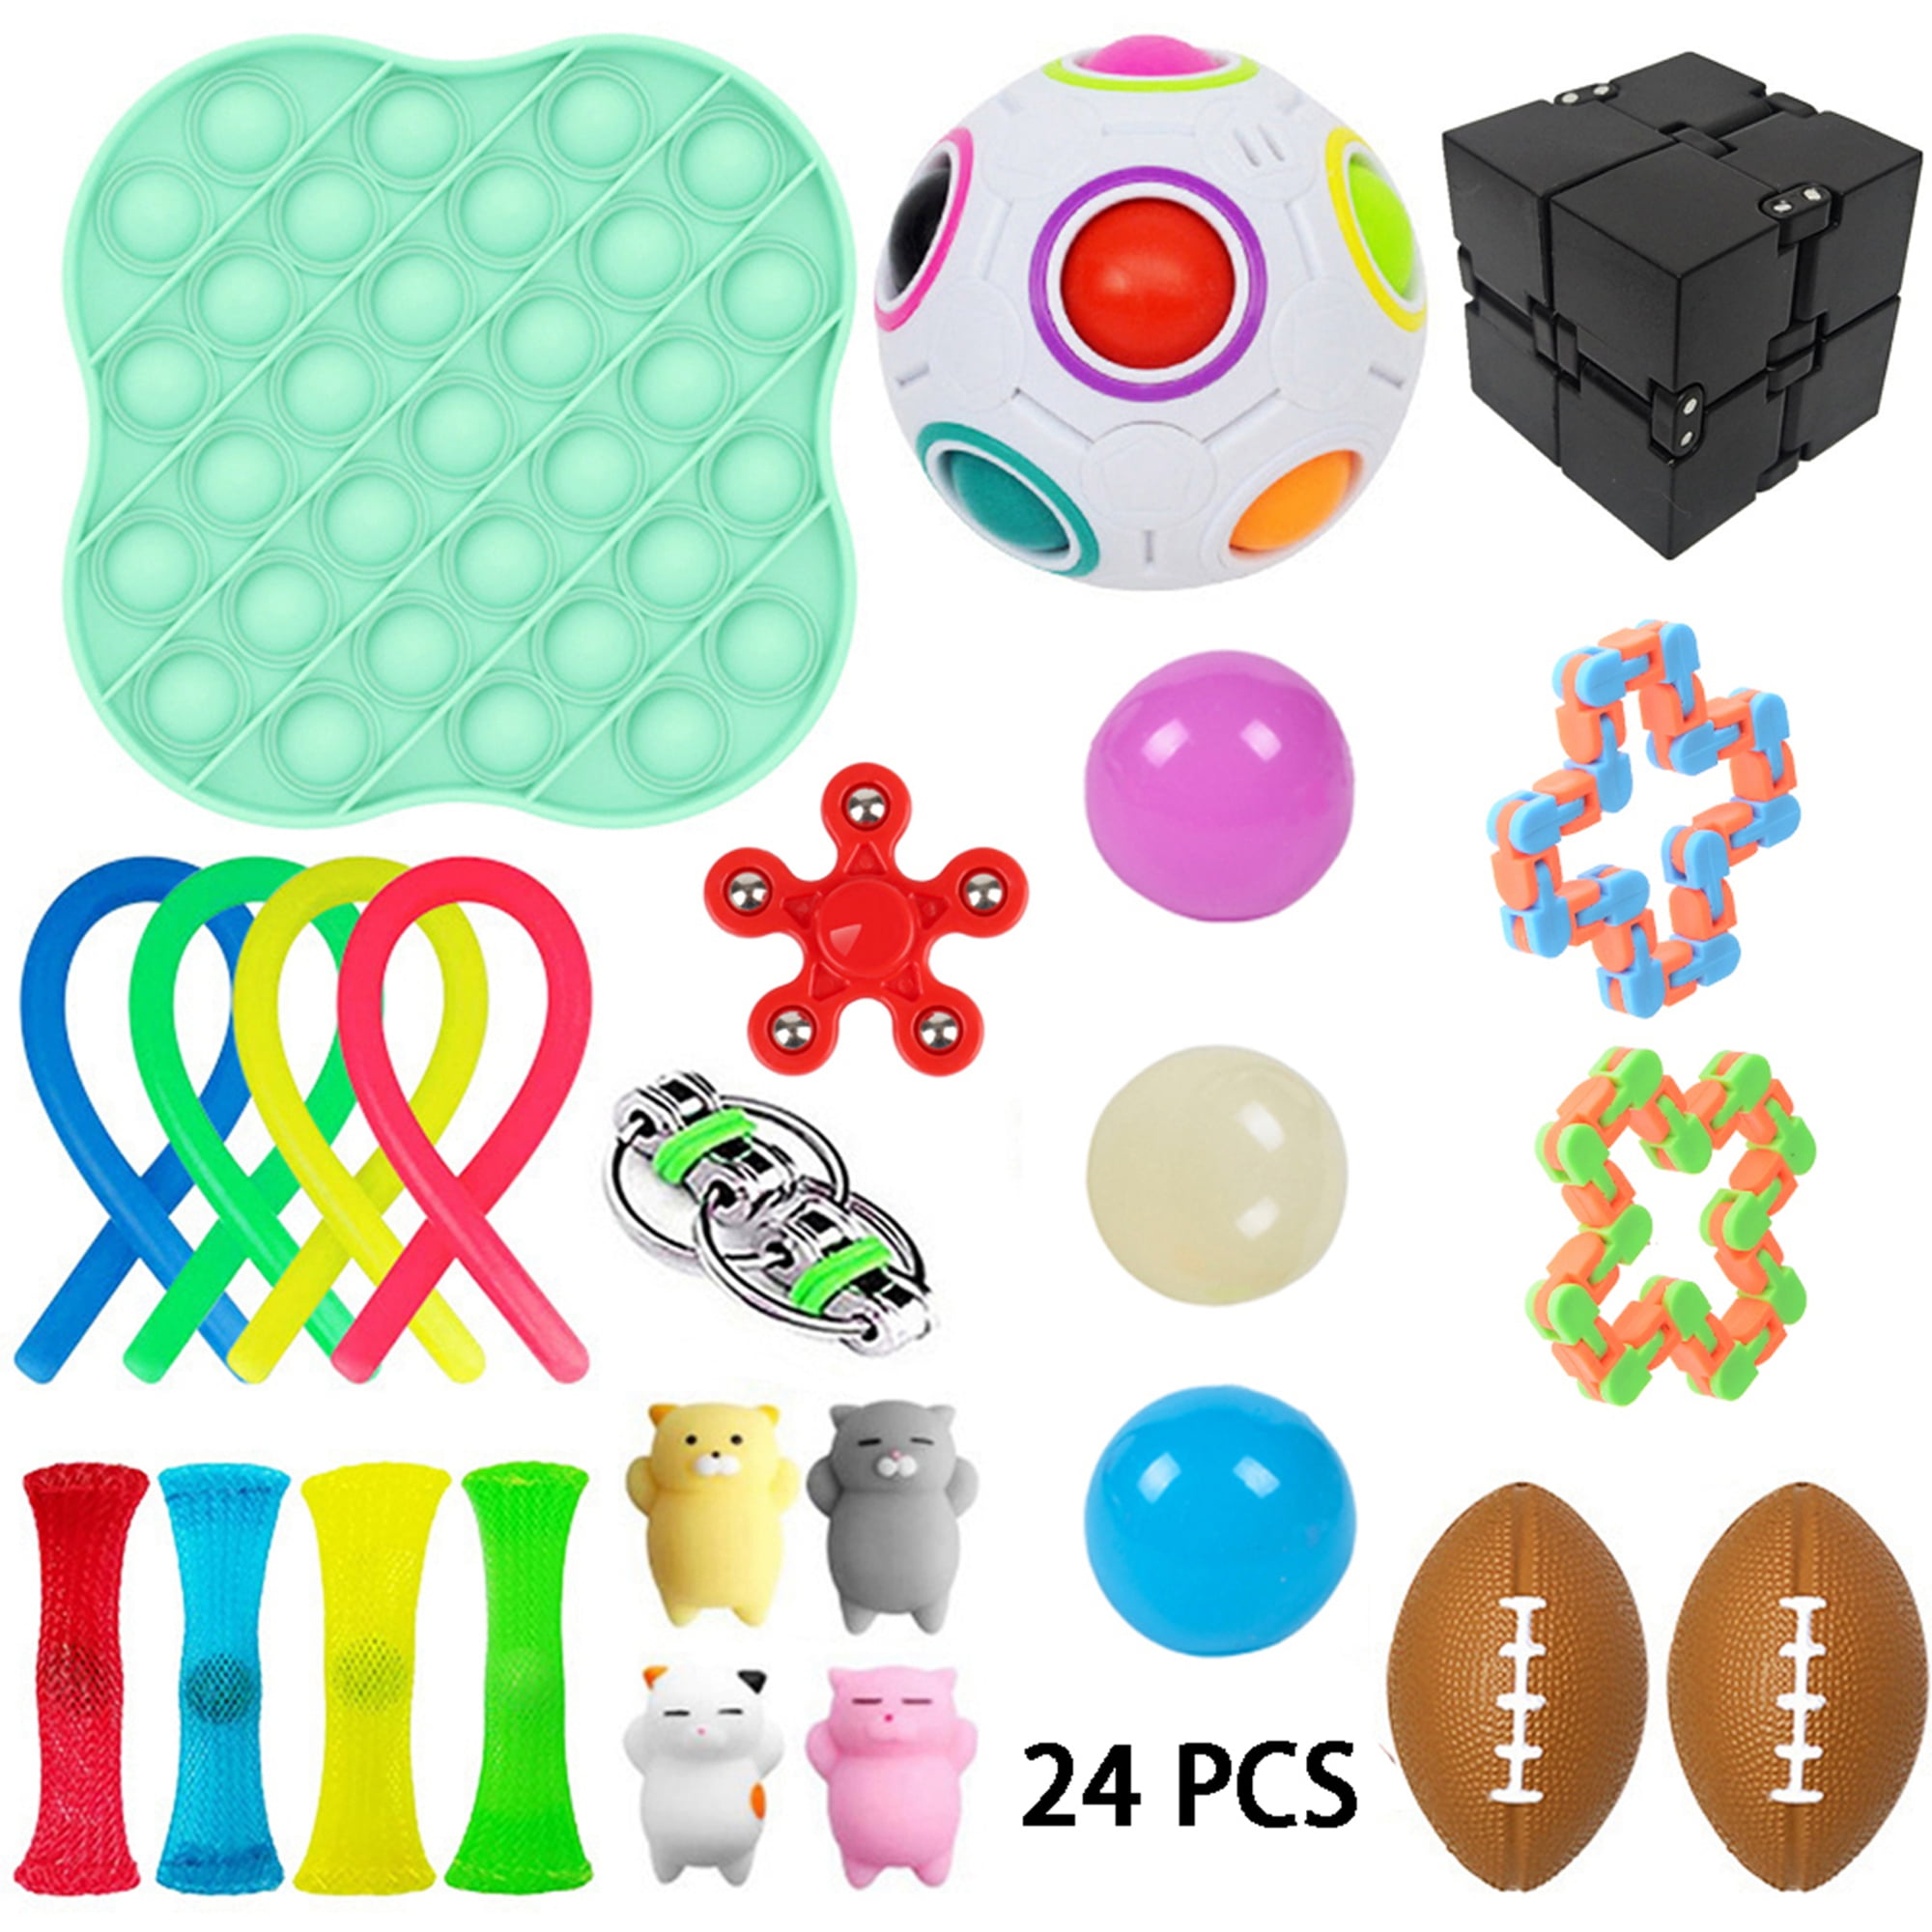 Details about   24 Pack Fidget Sensory Toys Autism ADHD Stress Relief Special Need Education hot 